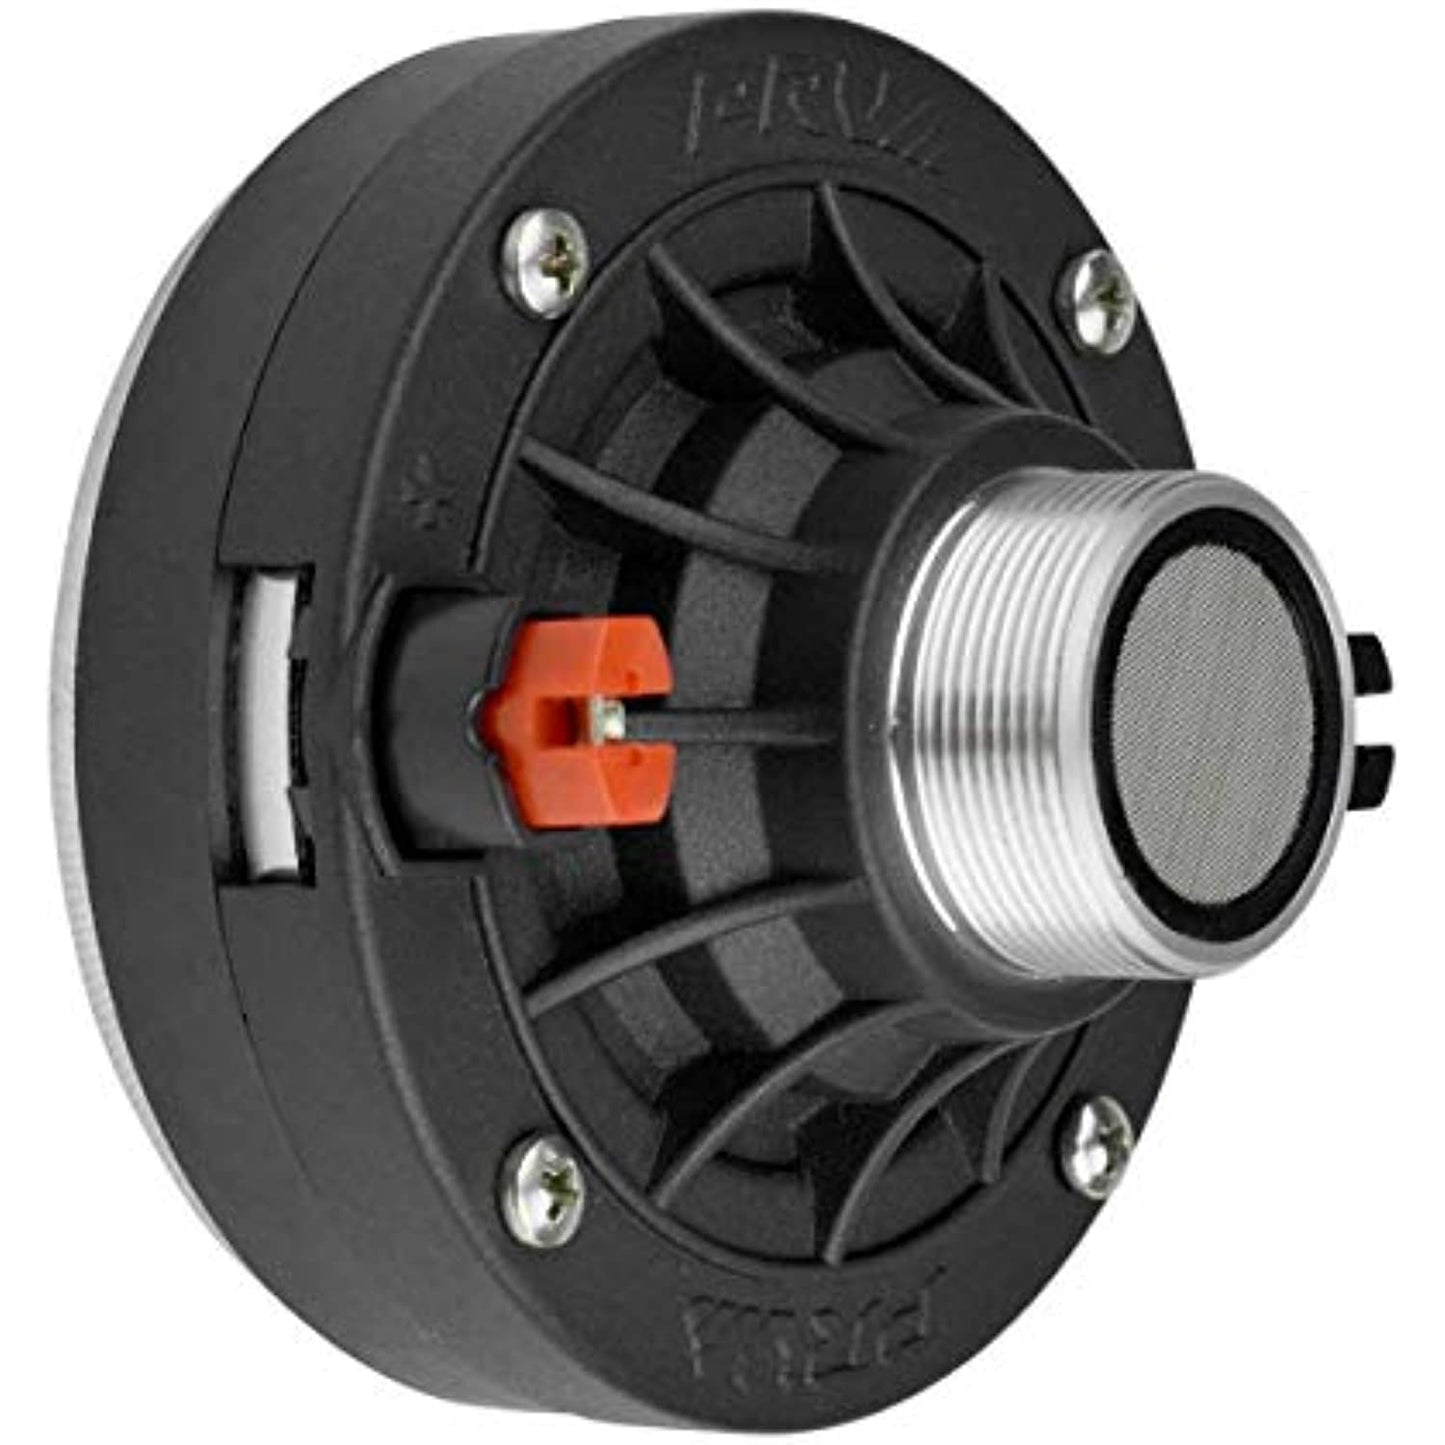 PRV AUDIO D270Ph Compression Driver 1" Exit Phenolic Driver for Vocal Reproduction, 2" Voice Coil 150 Watts 8 Ohms Improved Performance on New Compact Design (Single)